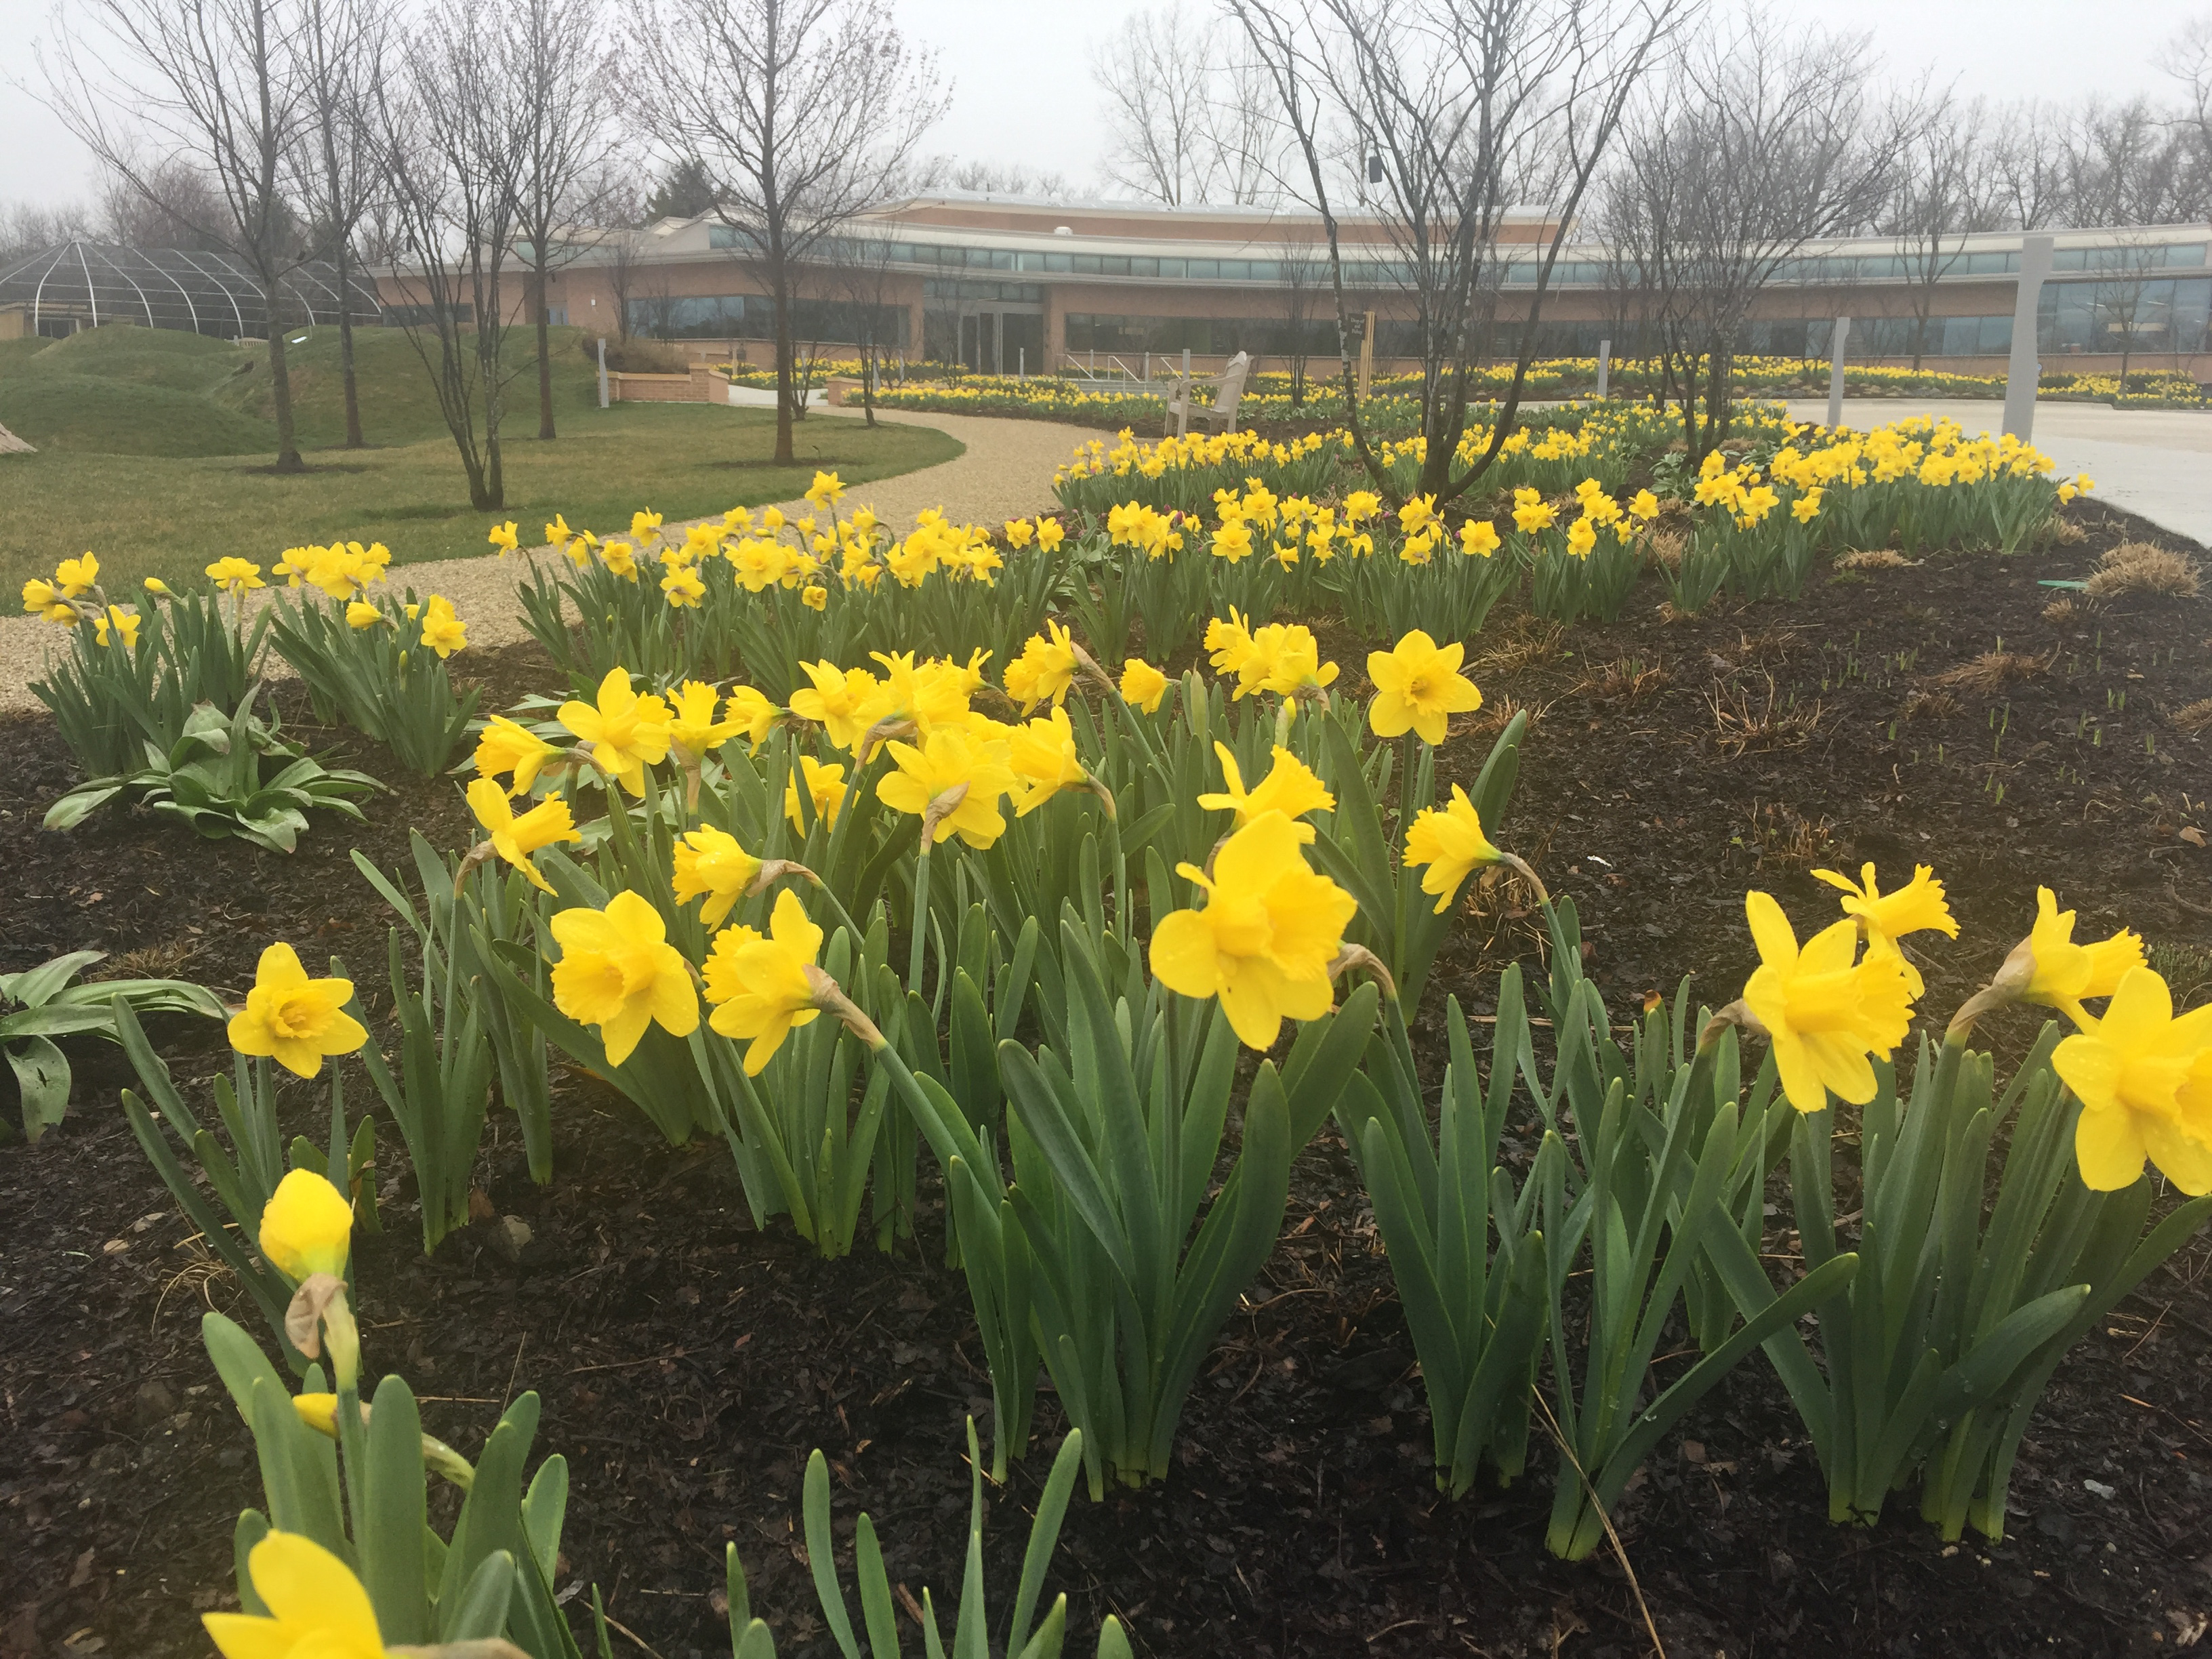 Daffodils in bloom at the Regenstein Learning Campus